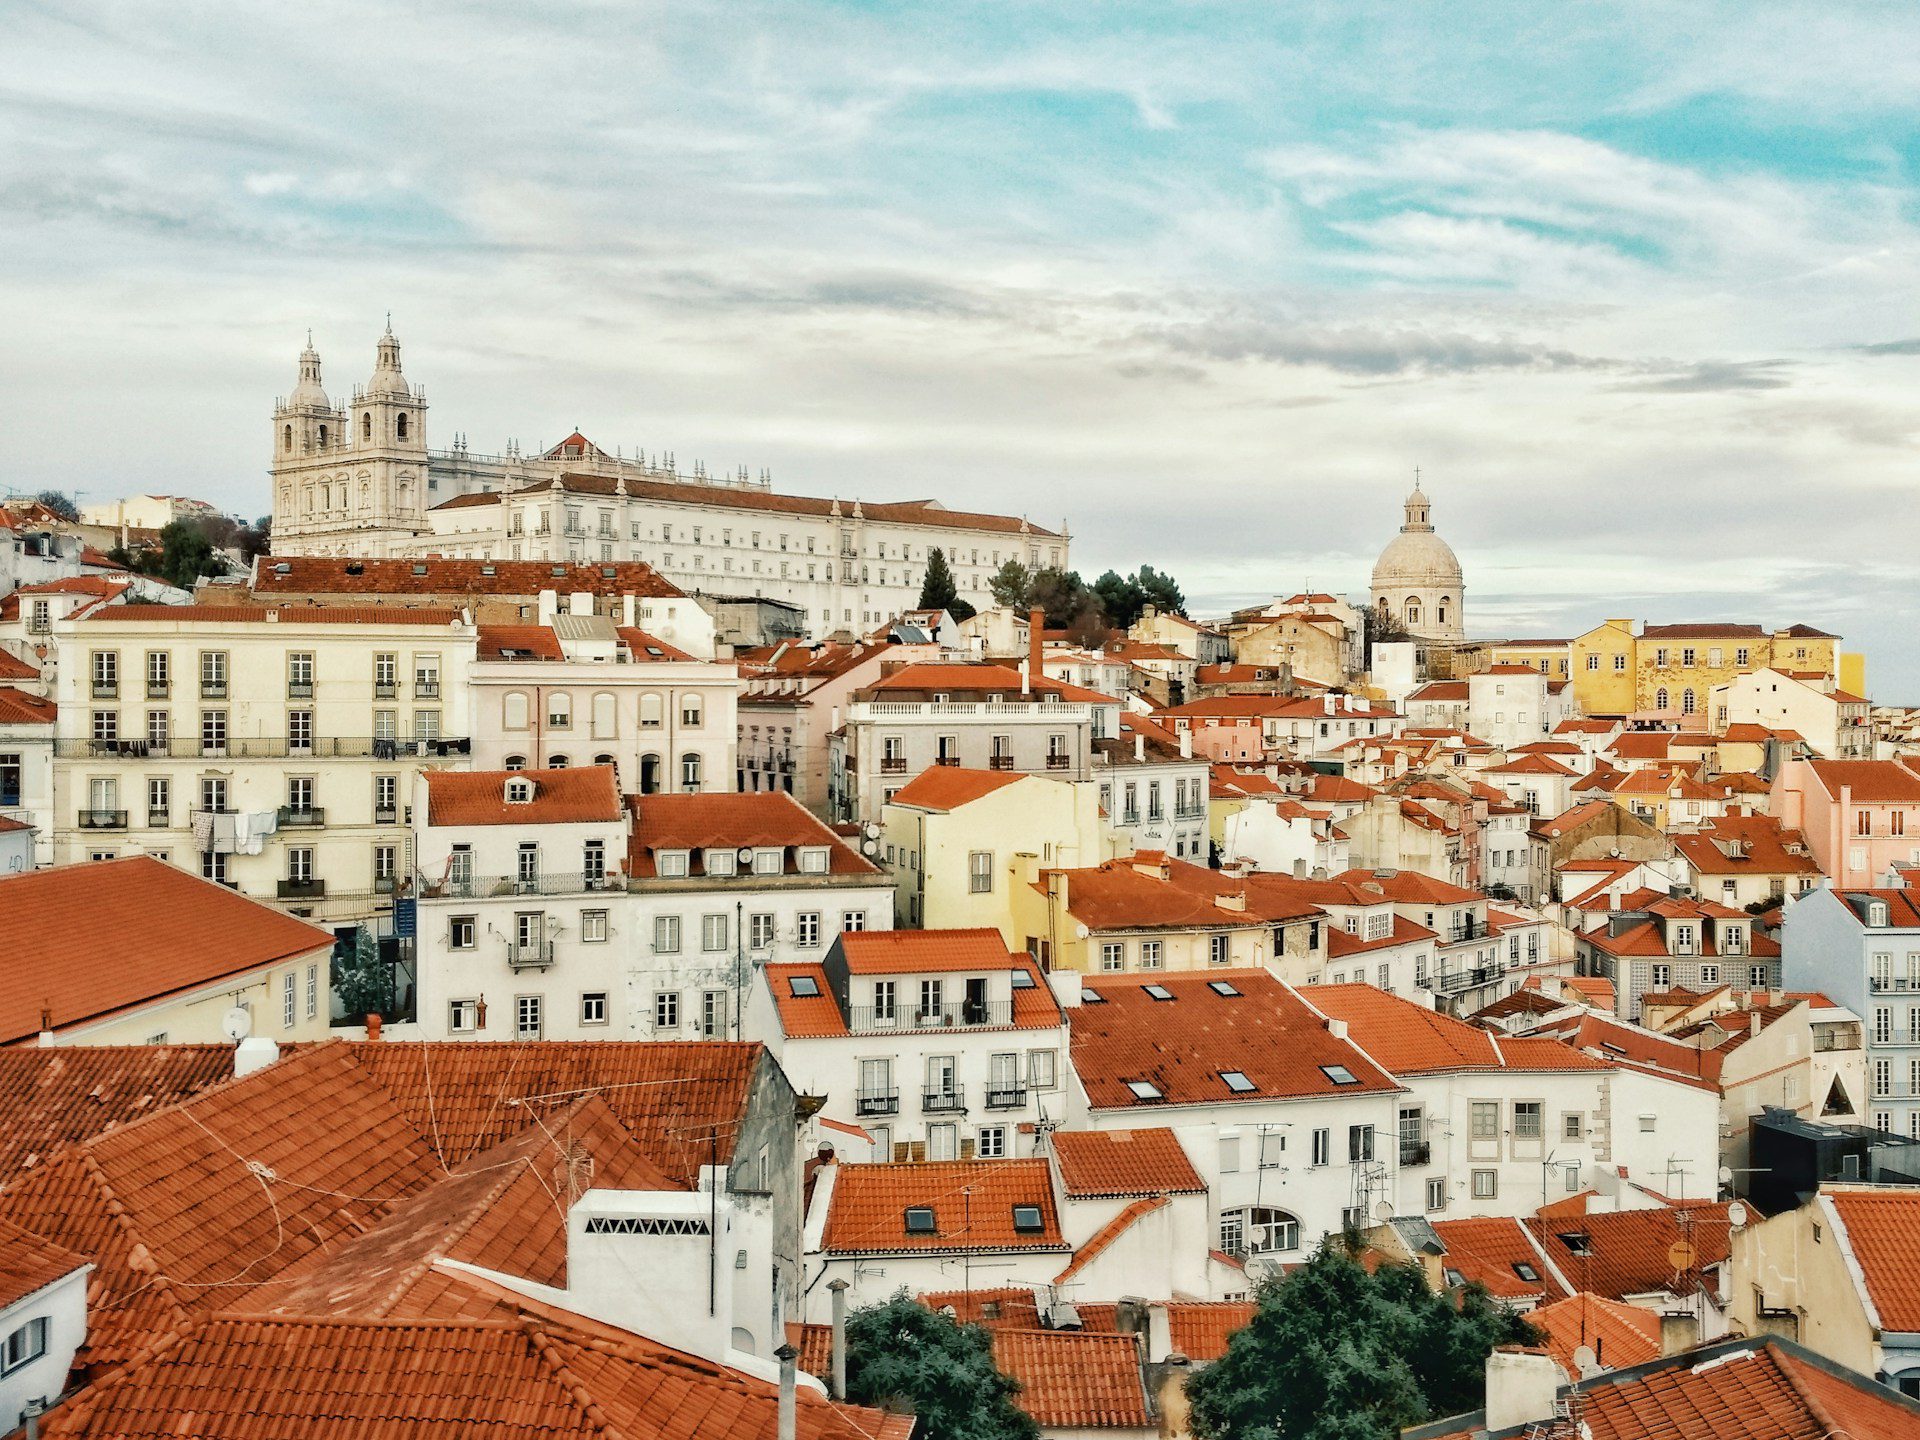 Rooftop view of Lisbon city centre, with sand and terracotta coloured rooftops.